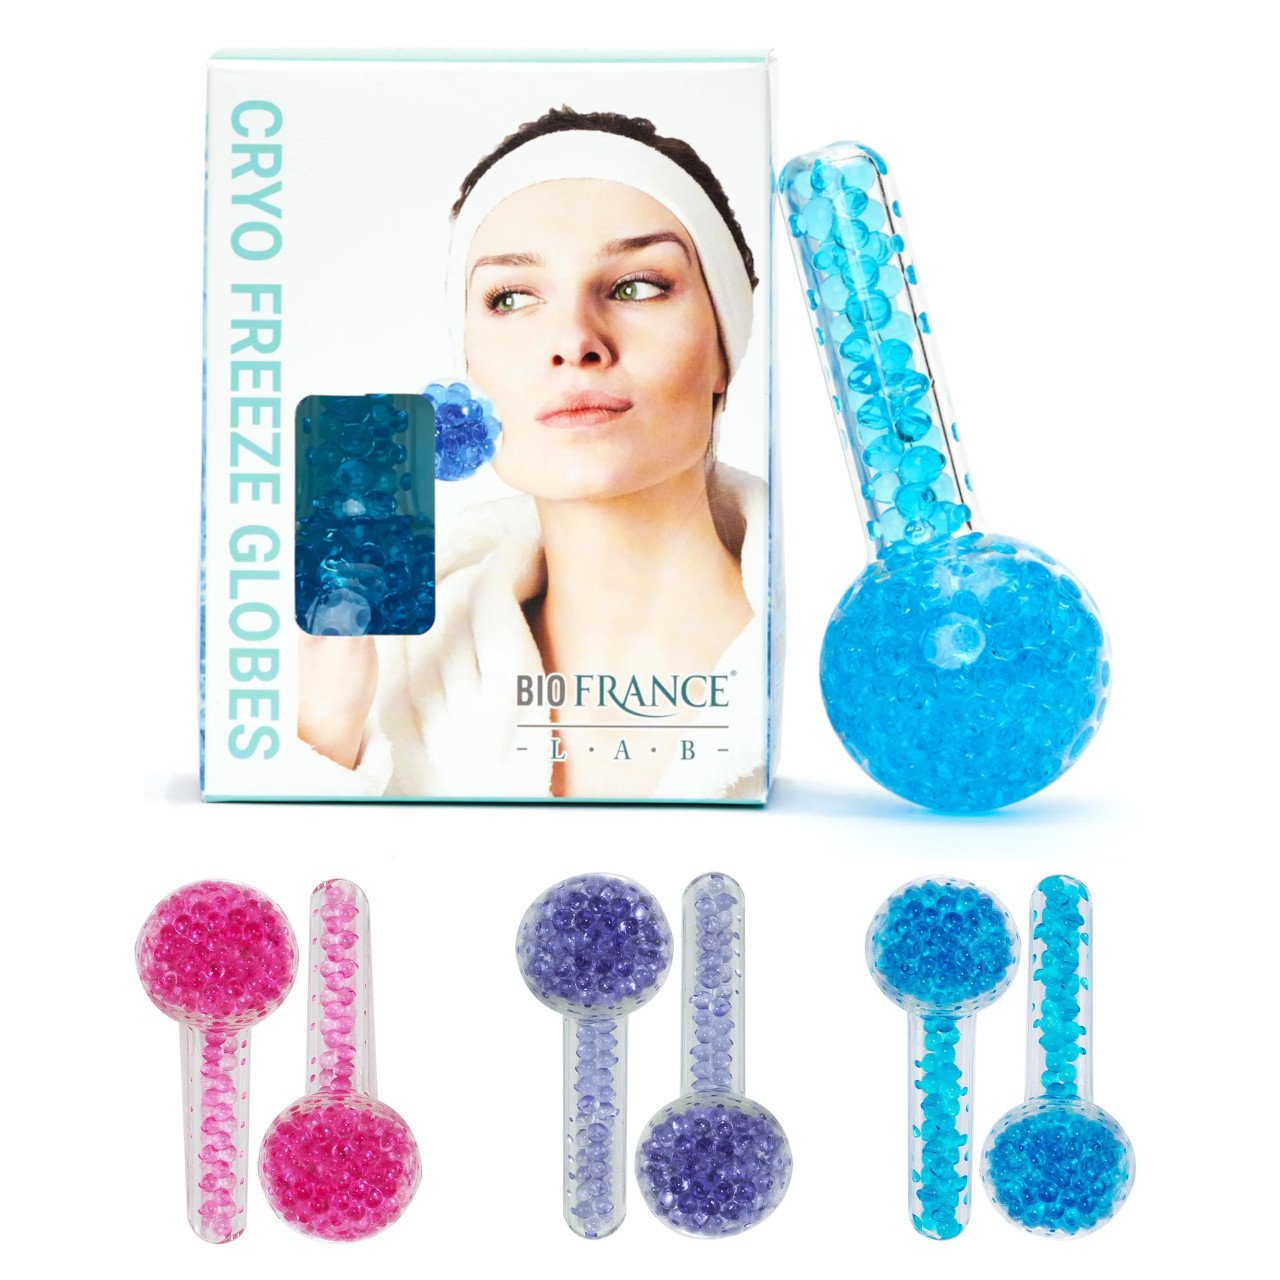 Bio France Lab Cryo Freeze Globes - 2 pieces Questions & Answers